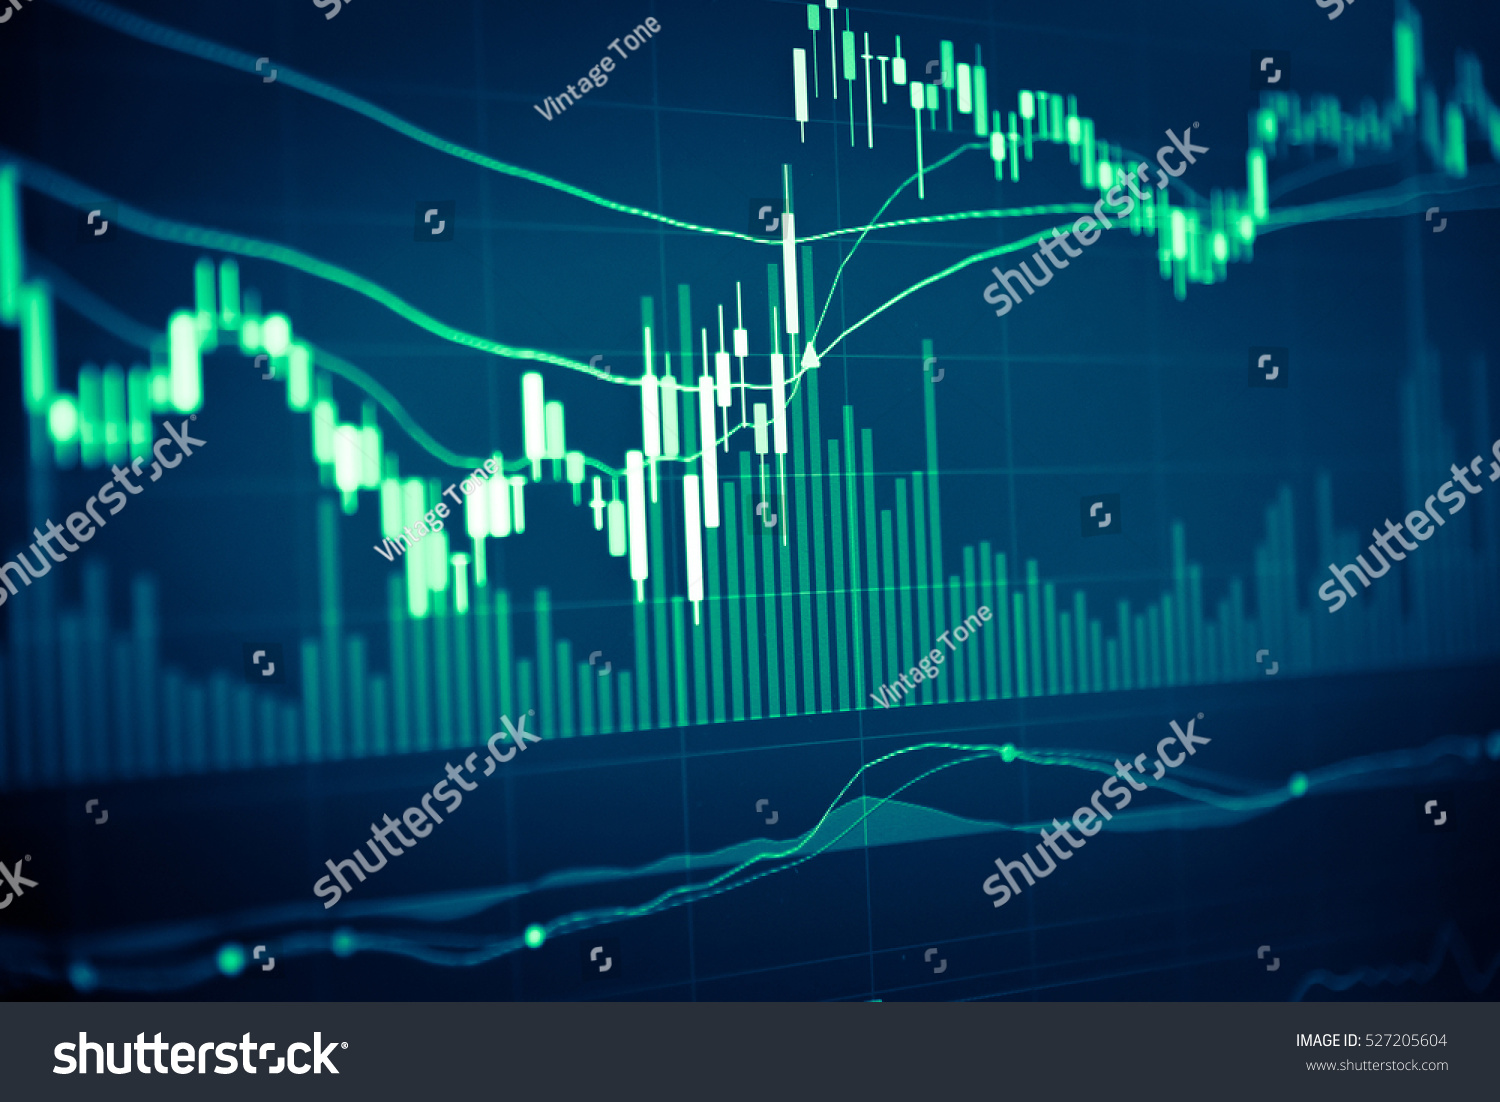 stock-photo-forex-market-background-trading-on-the-currency-market-forex-currency-exchange-rate-for-world-527205604.jpg